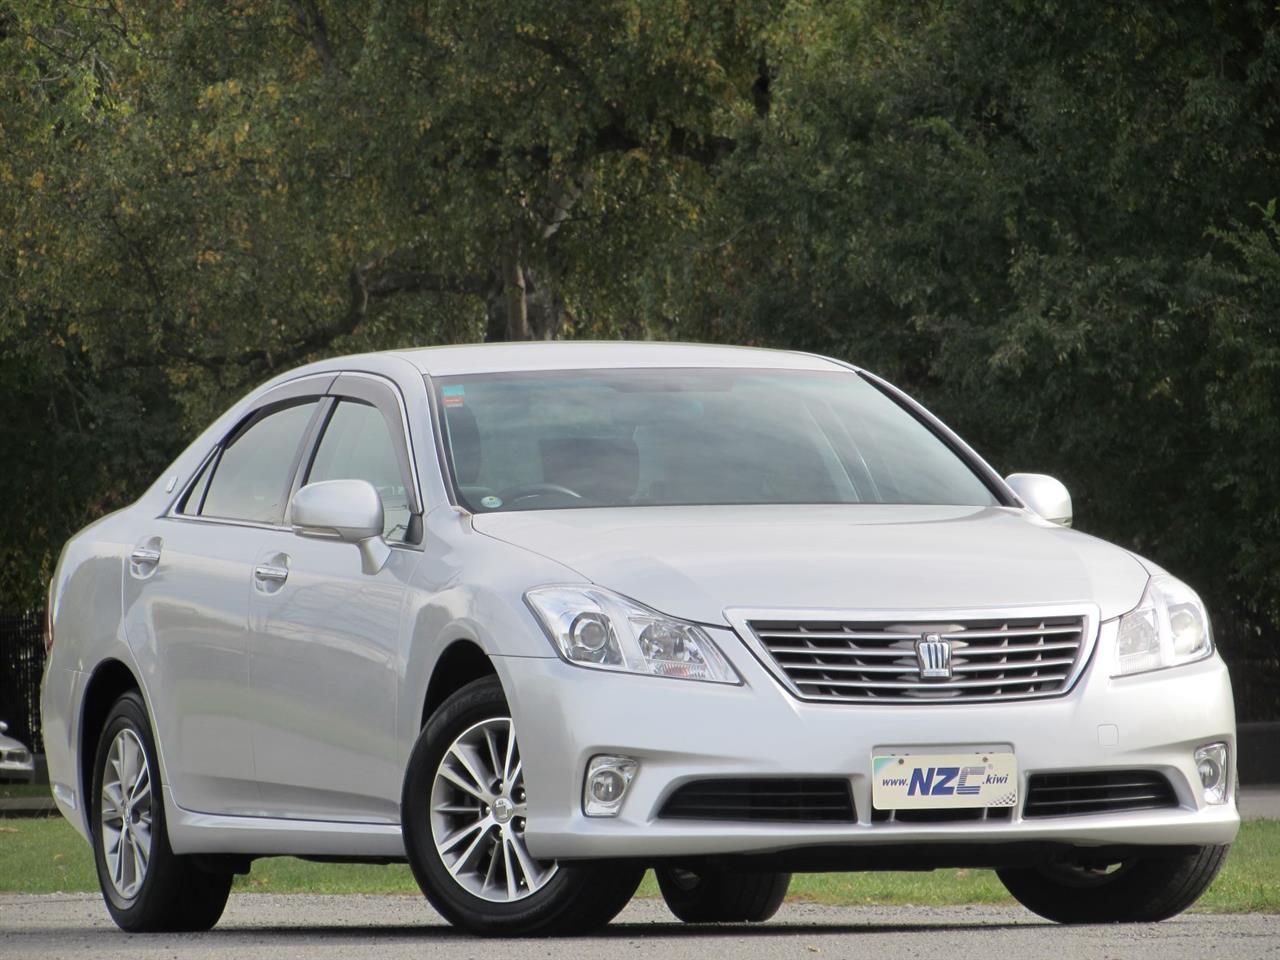 NZC best hot price for 2011 Toyota Crown in Christchurch